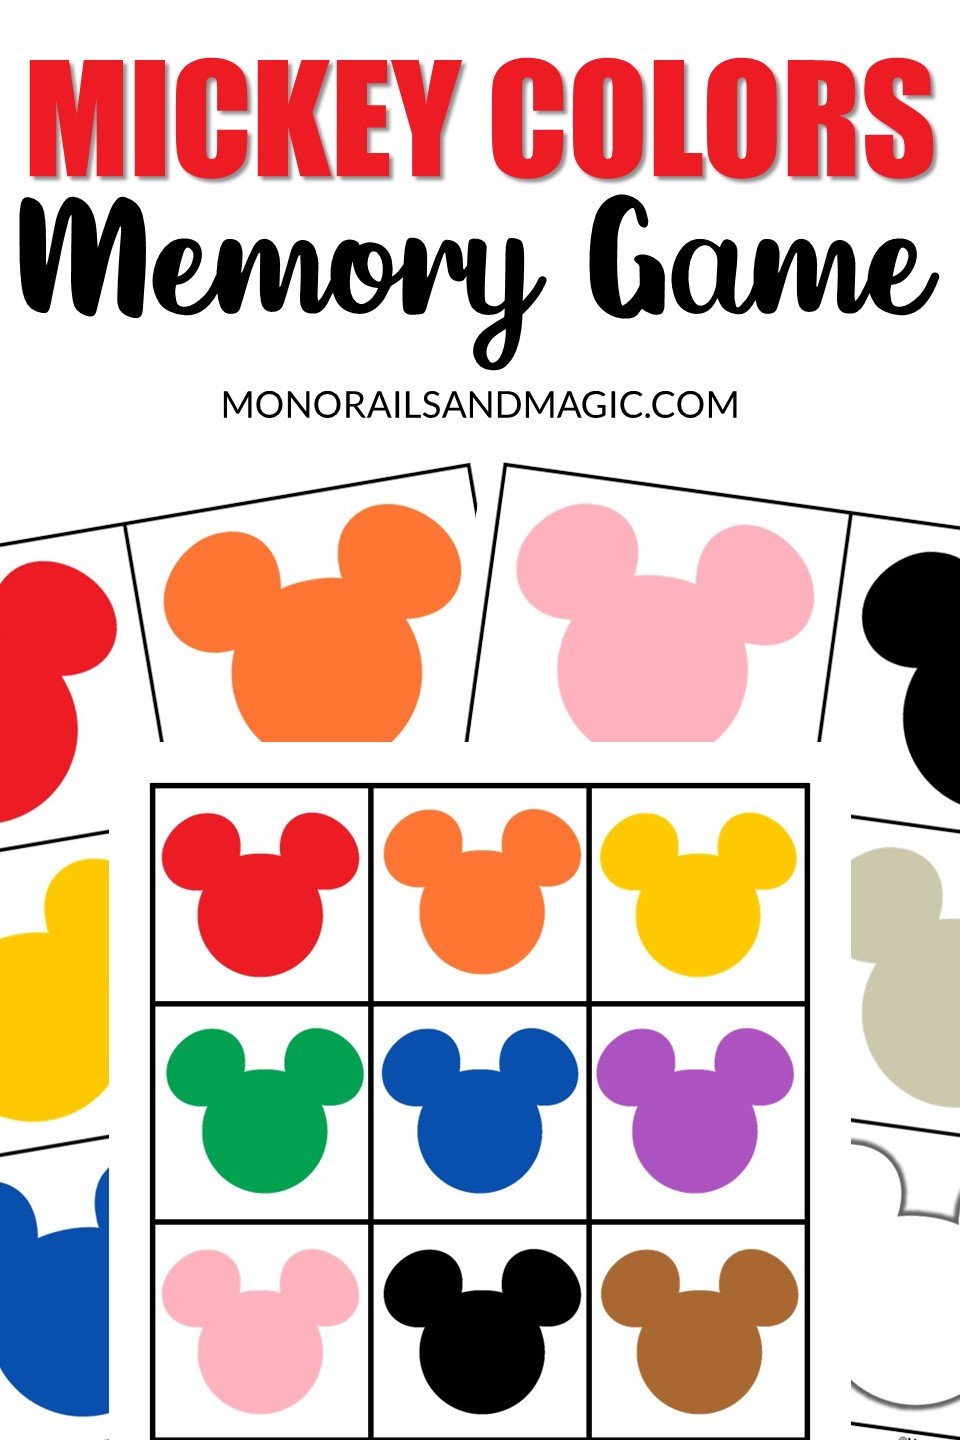 Free printable Mickey Mouse colors memory game.